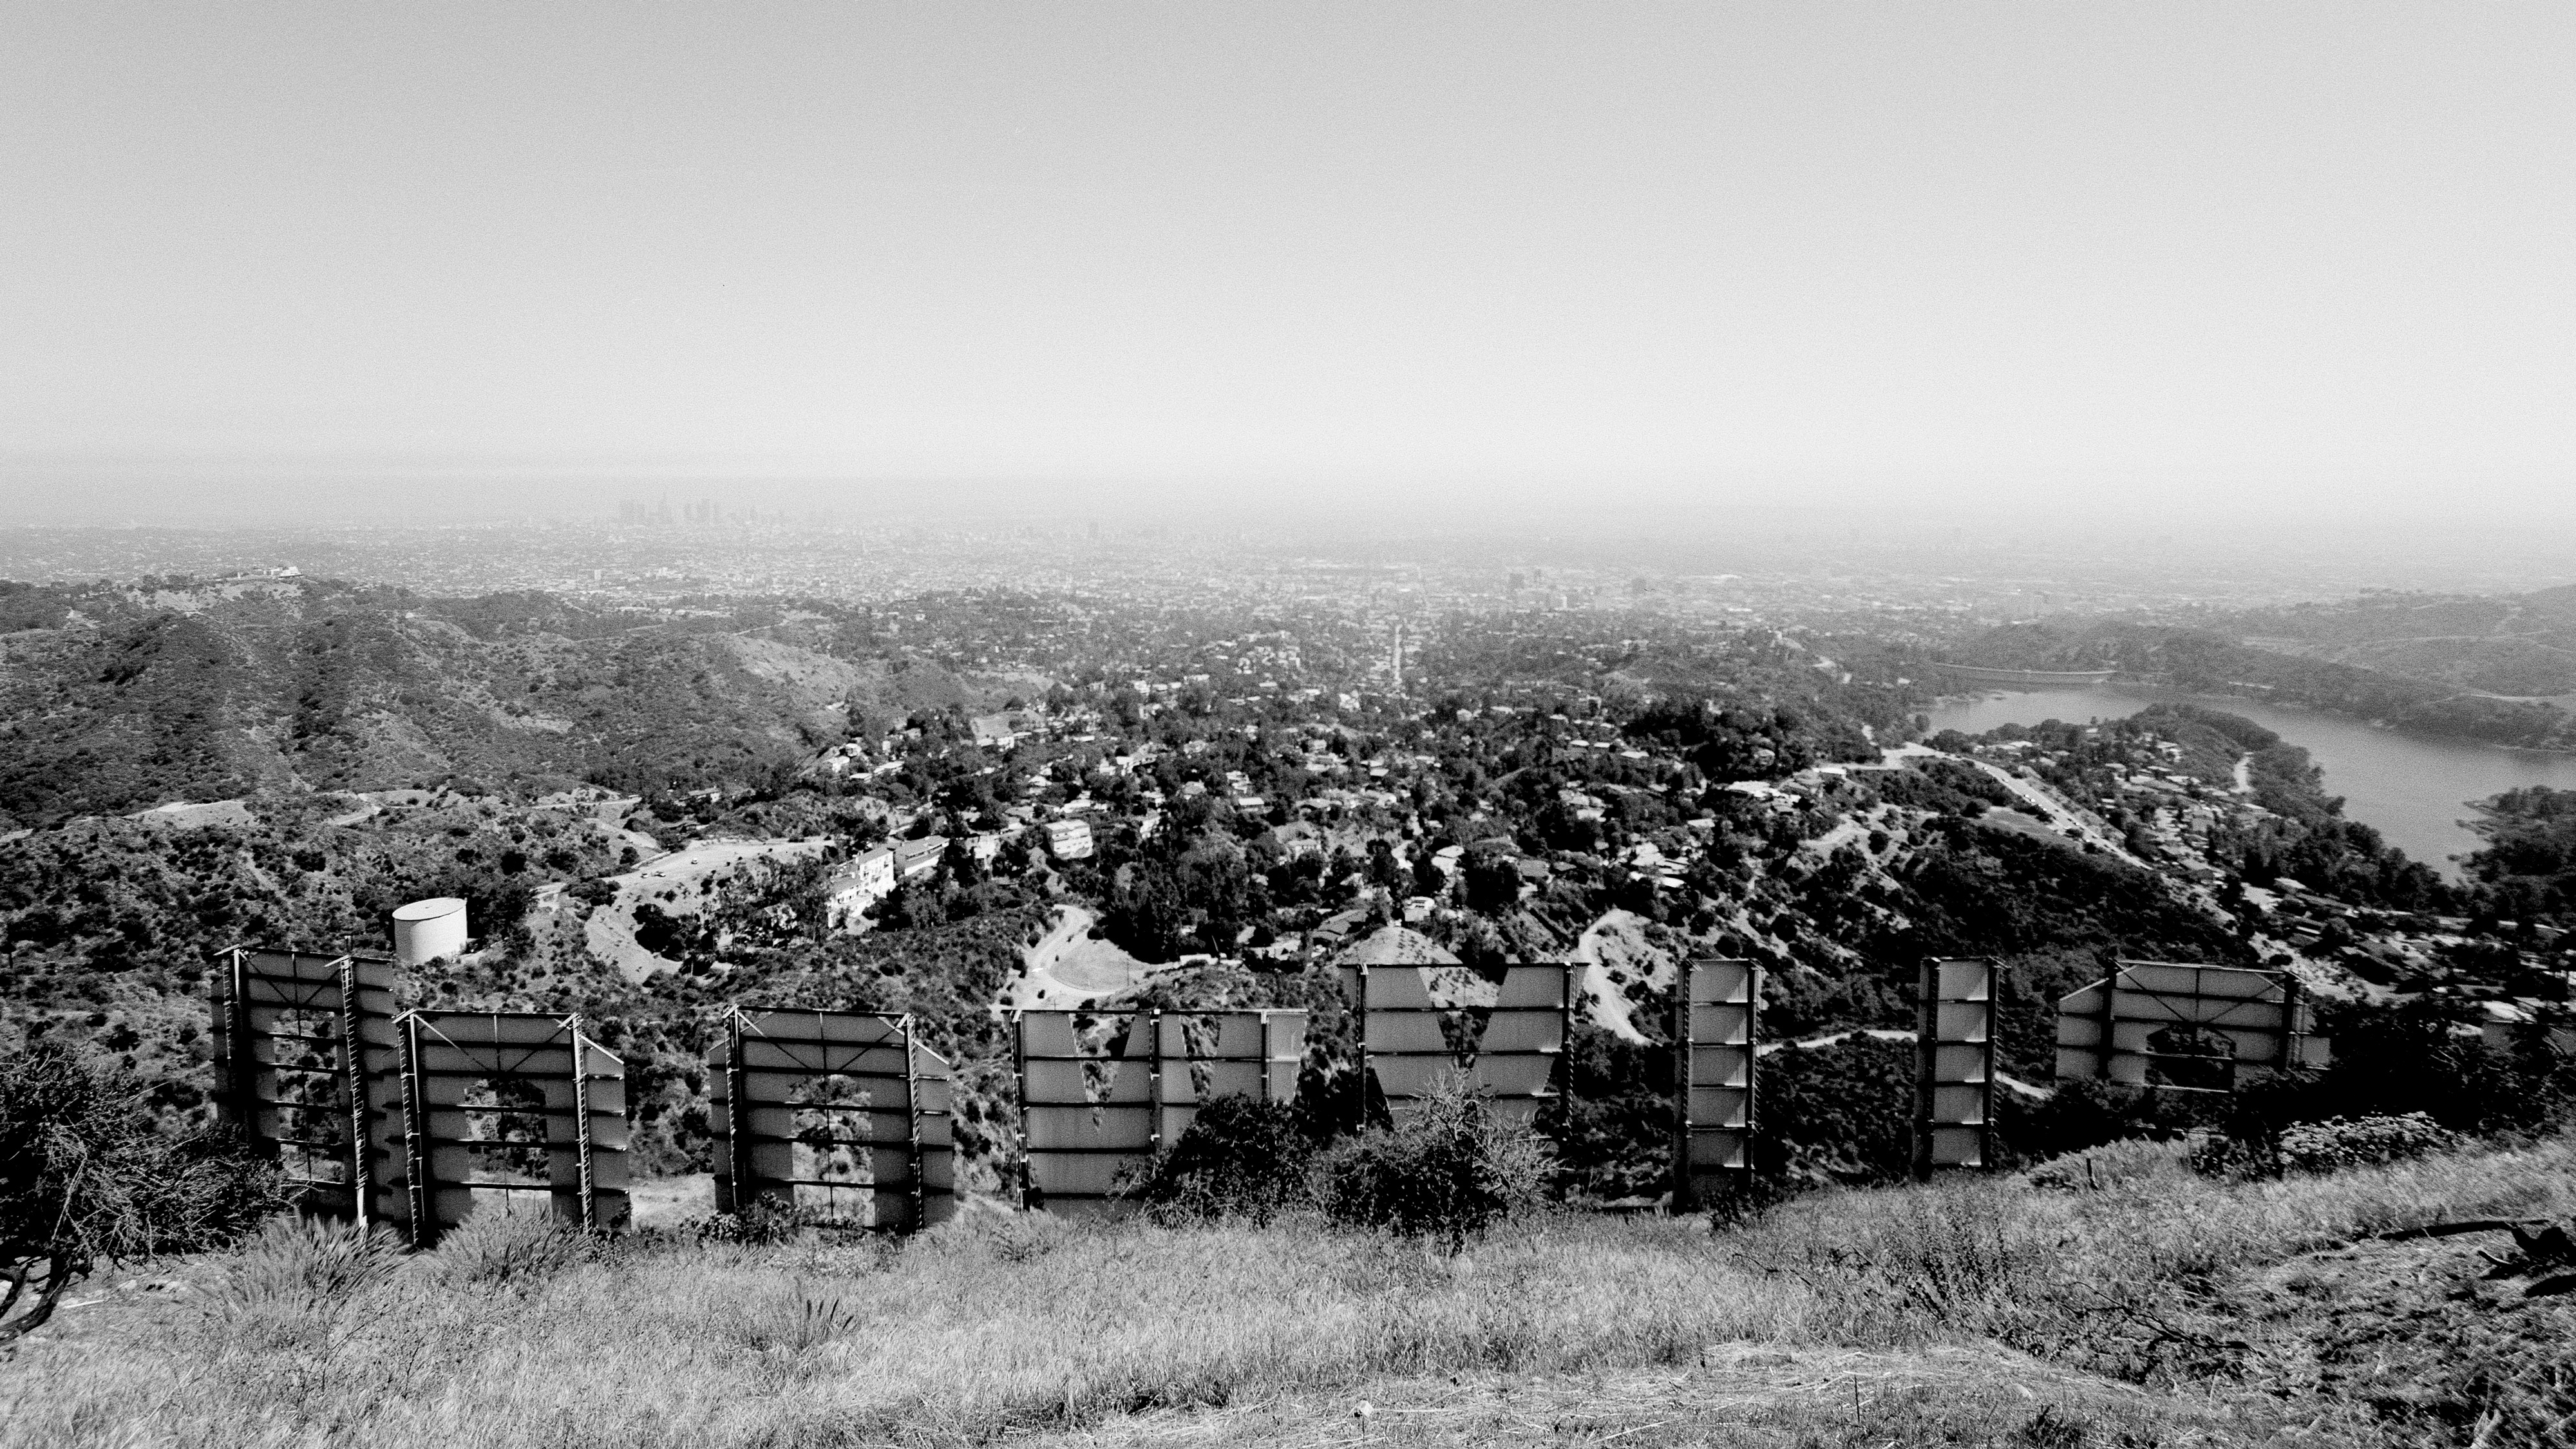 A black-and-white photo showing the back of the Hollywood sign